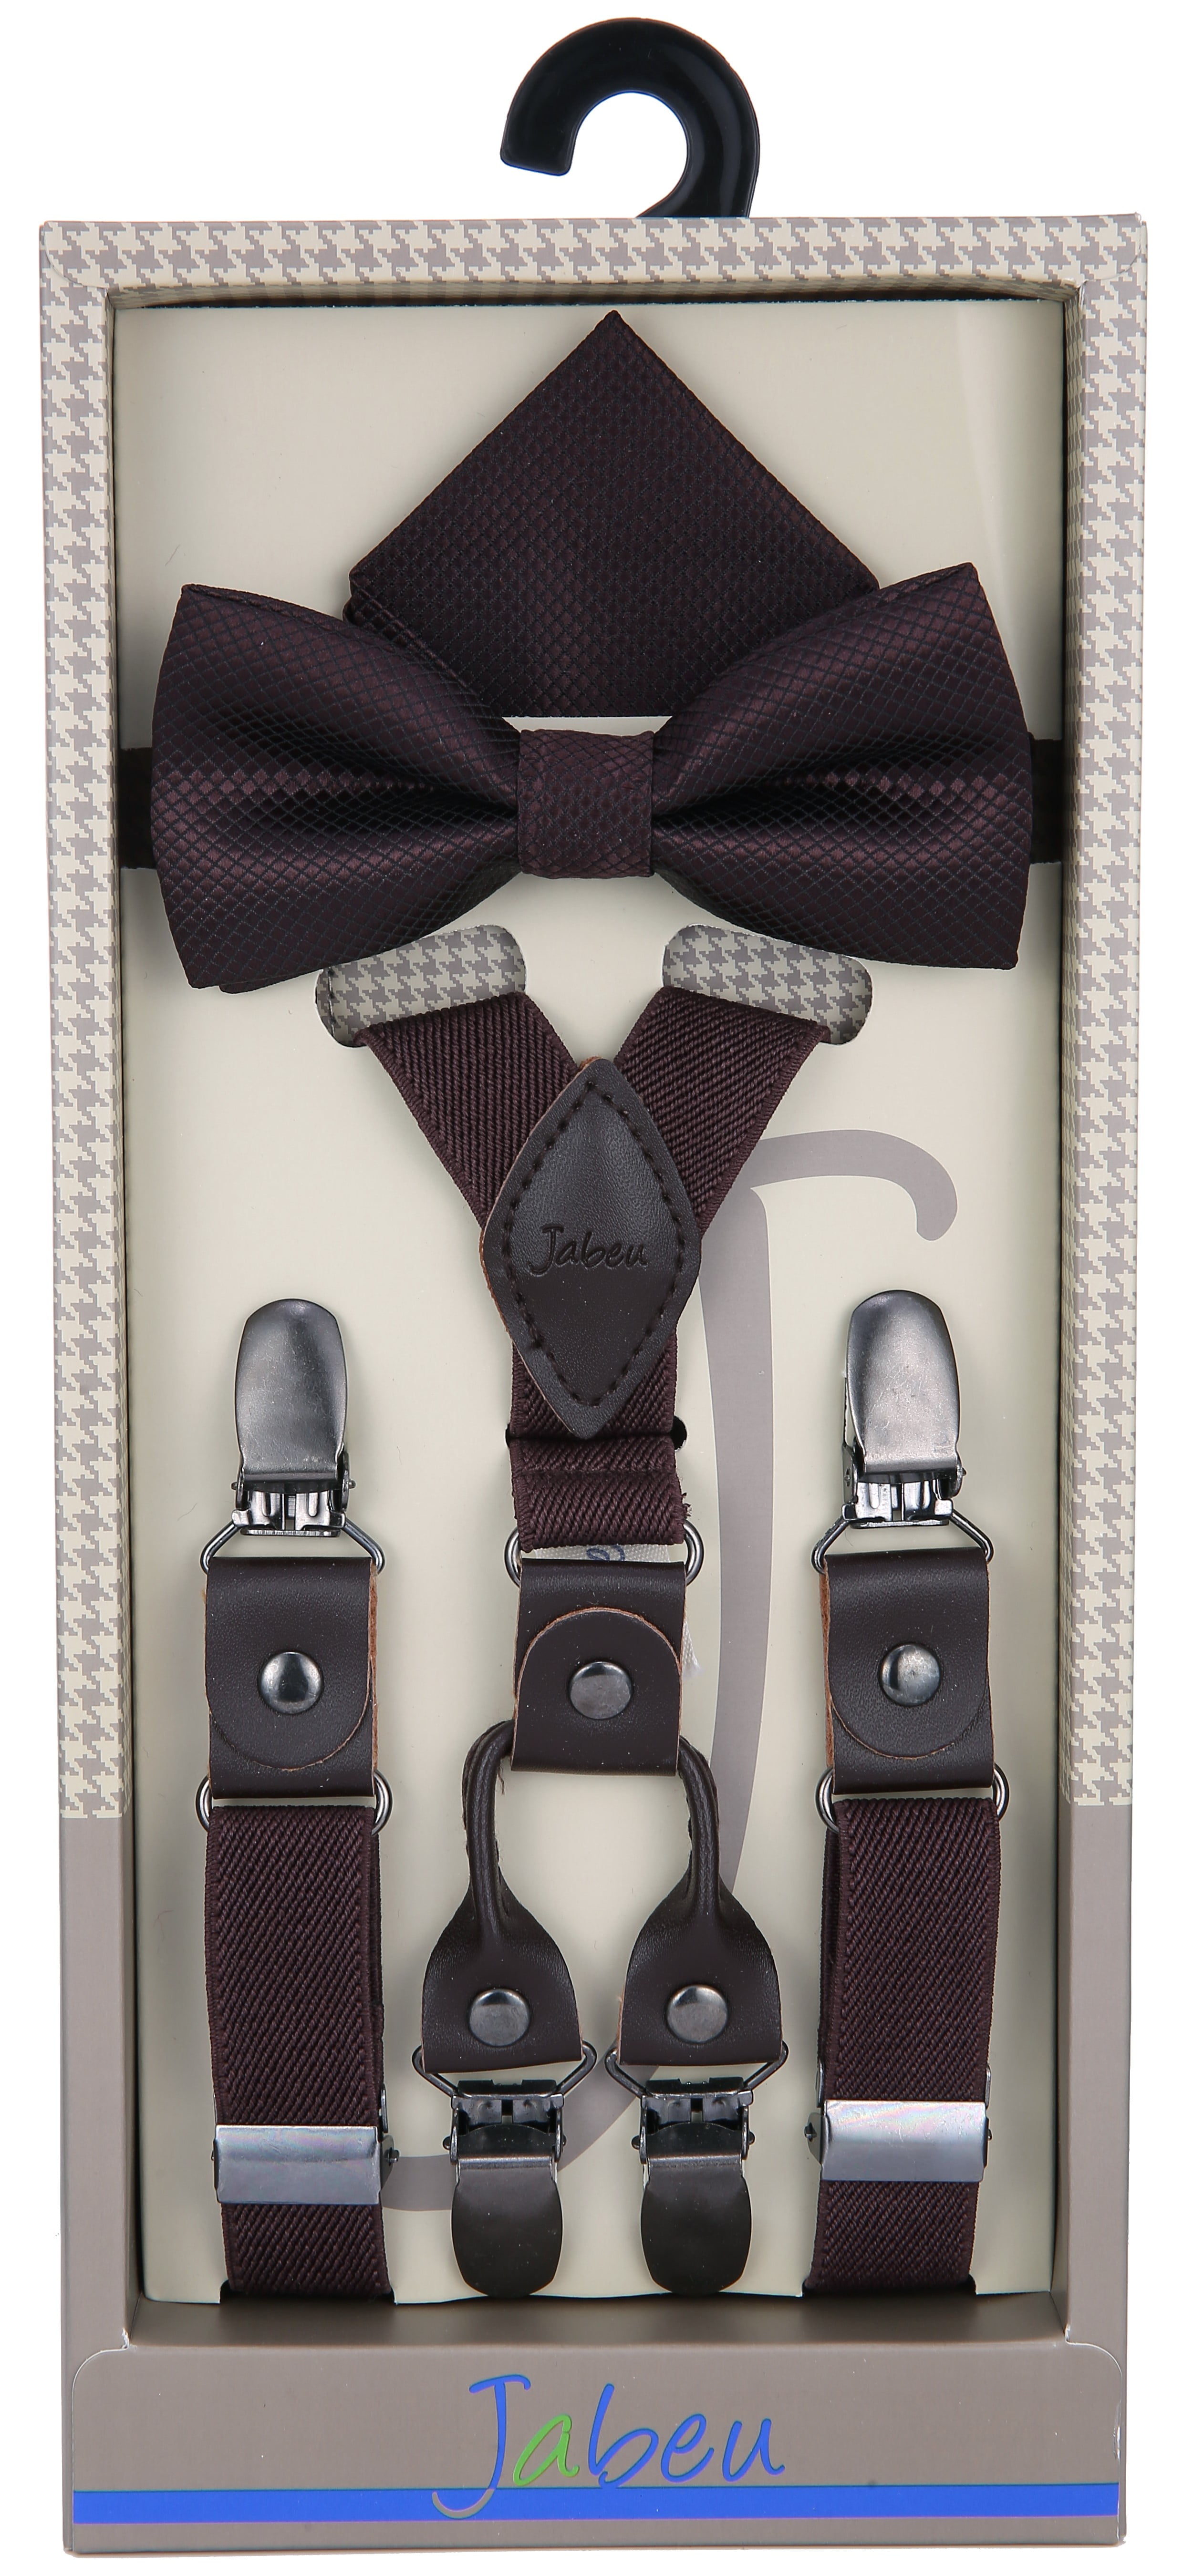 Marino Elastic Fashion Suspenders 1 Wide with Genuine Leather Tips and Polyester Bow Tie Set for Men and Teens